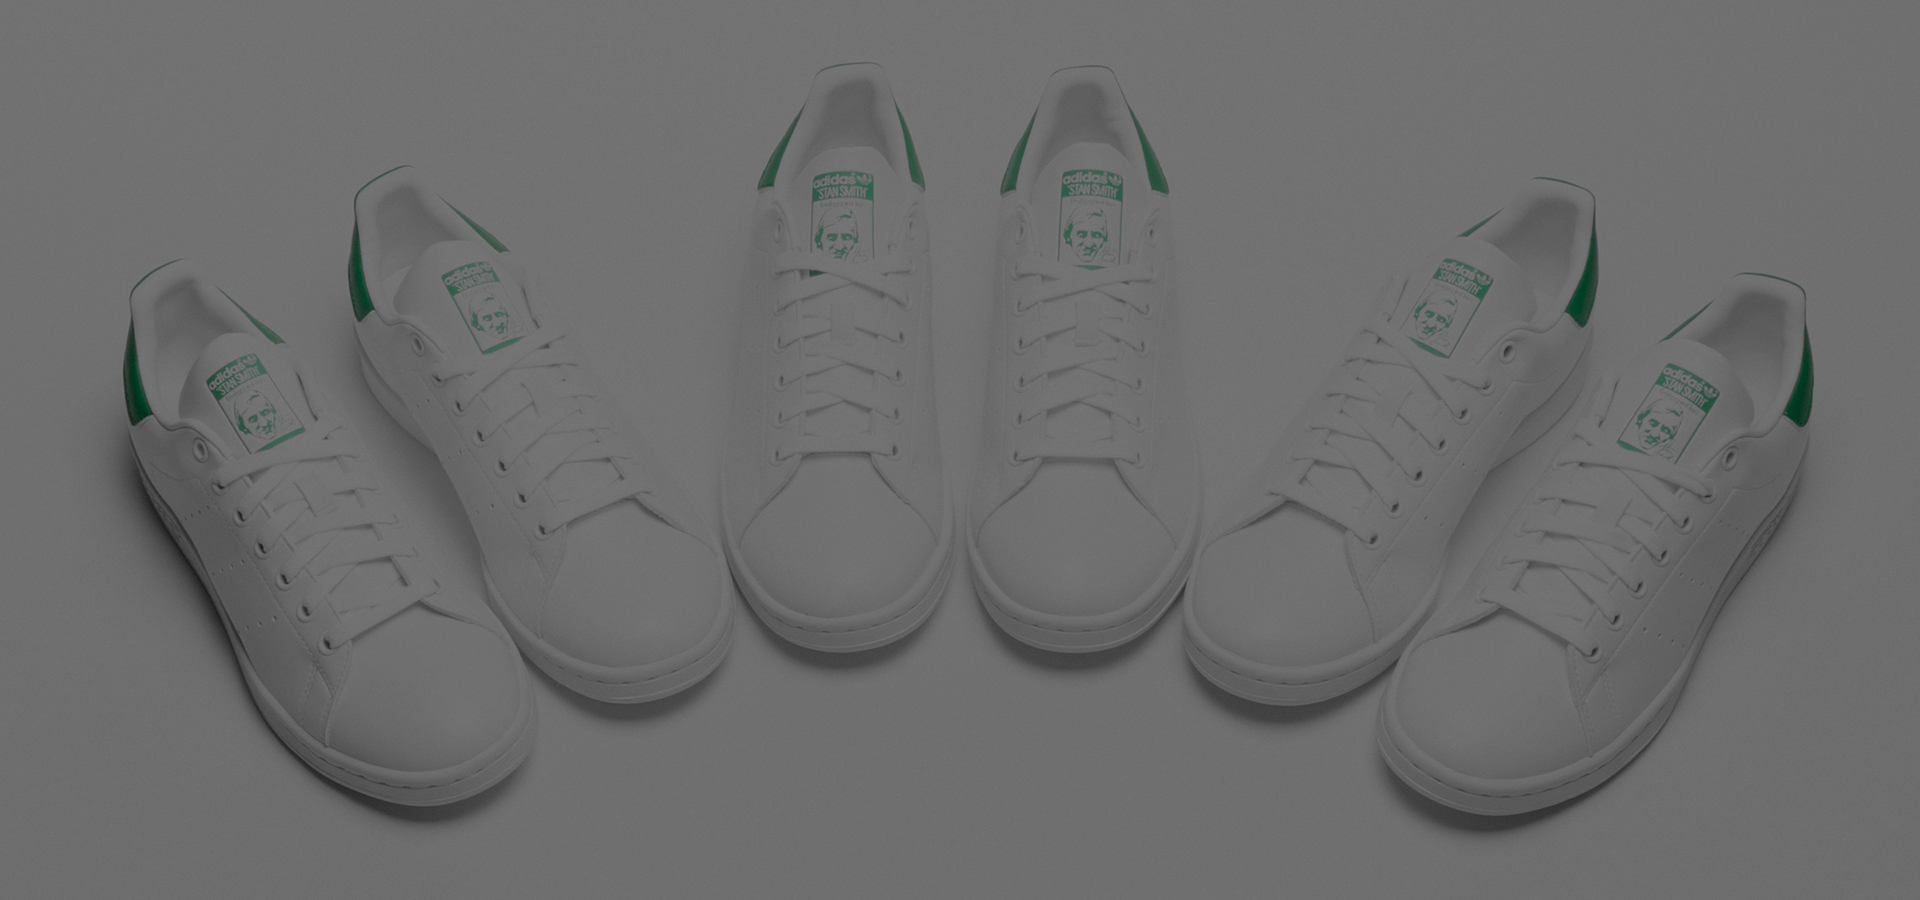 Apparently Custom Deloitte Stan Smith Adidas Sneakers Are a Thing - Going  Concern